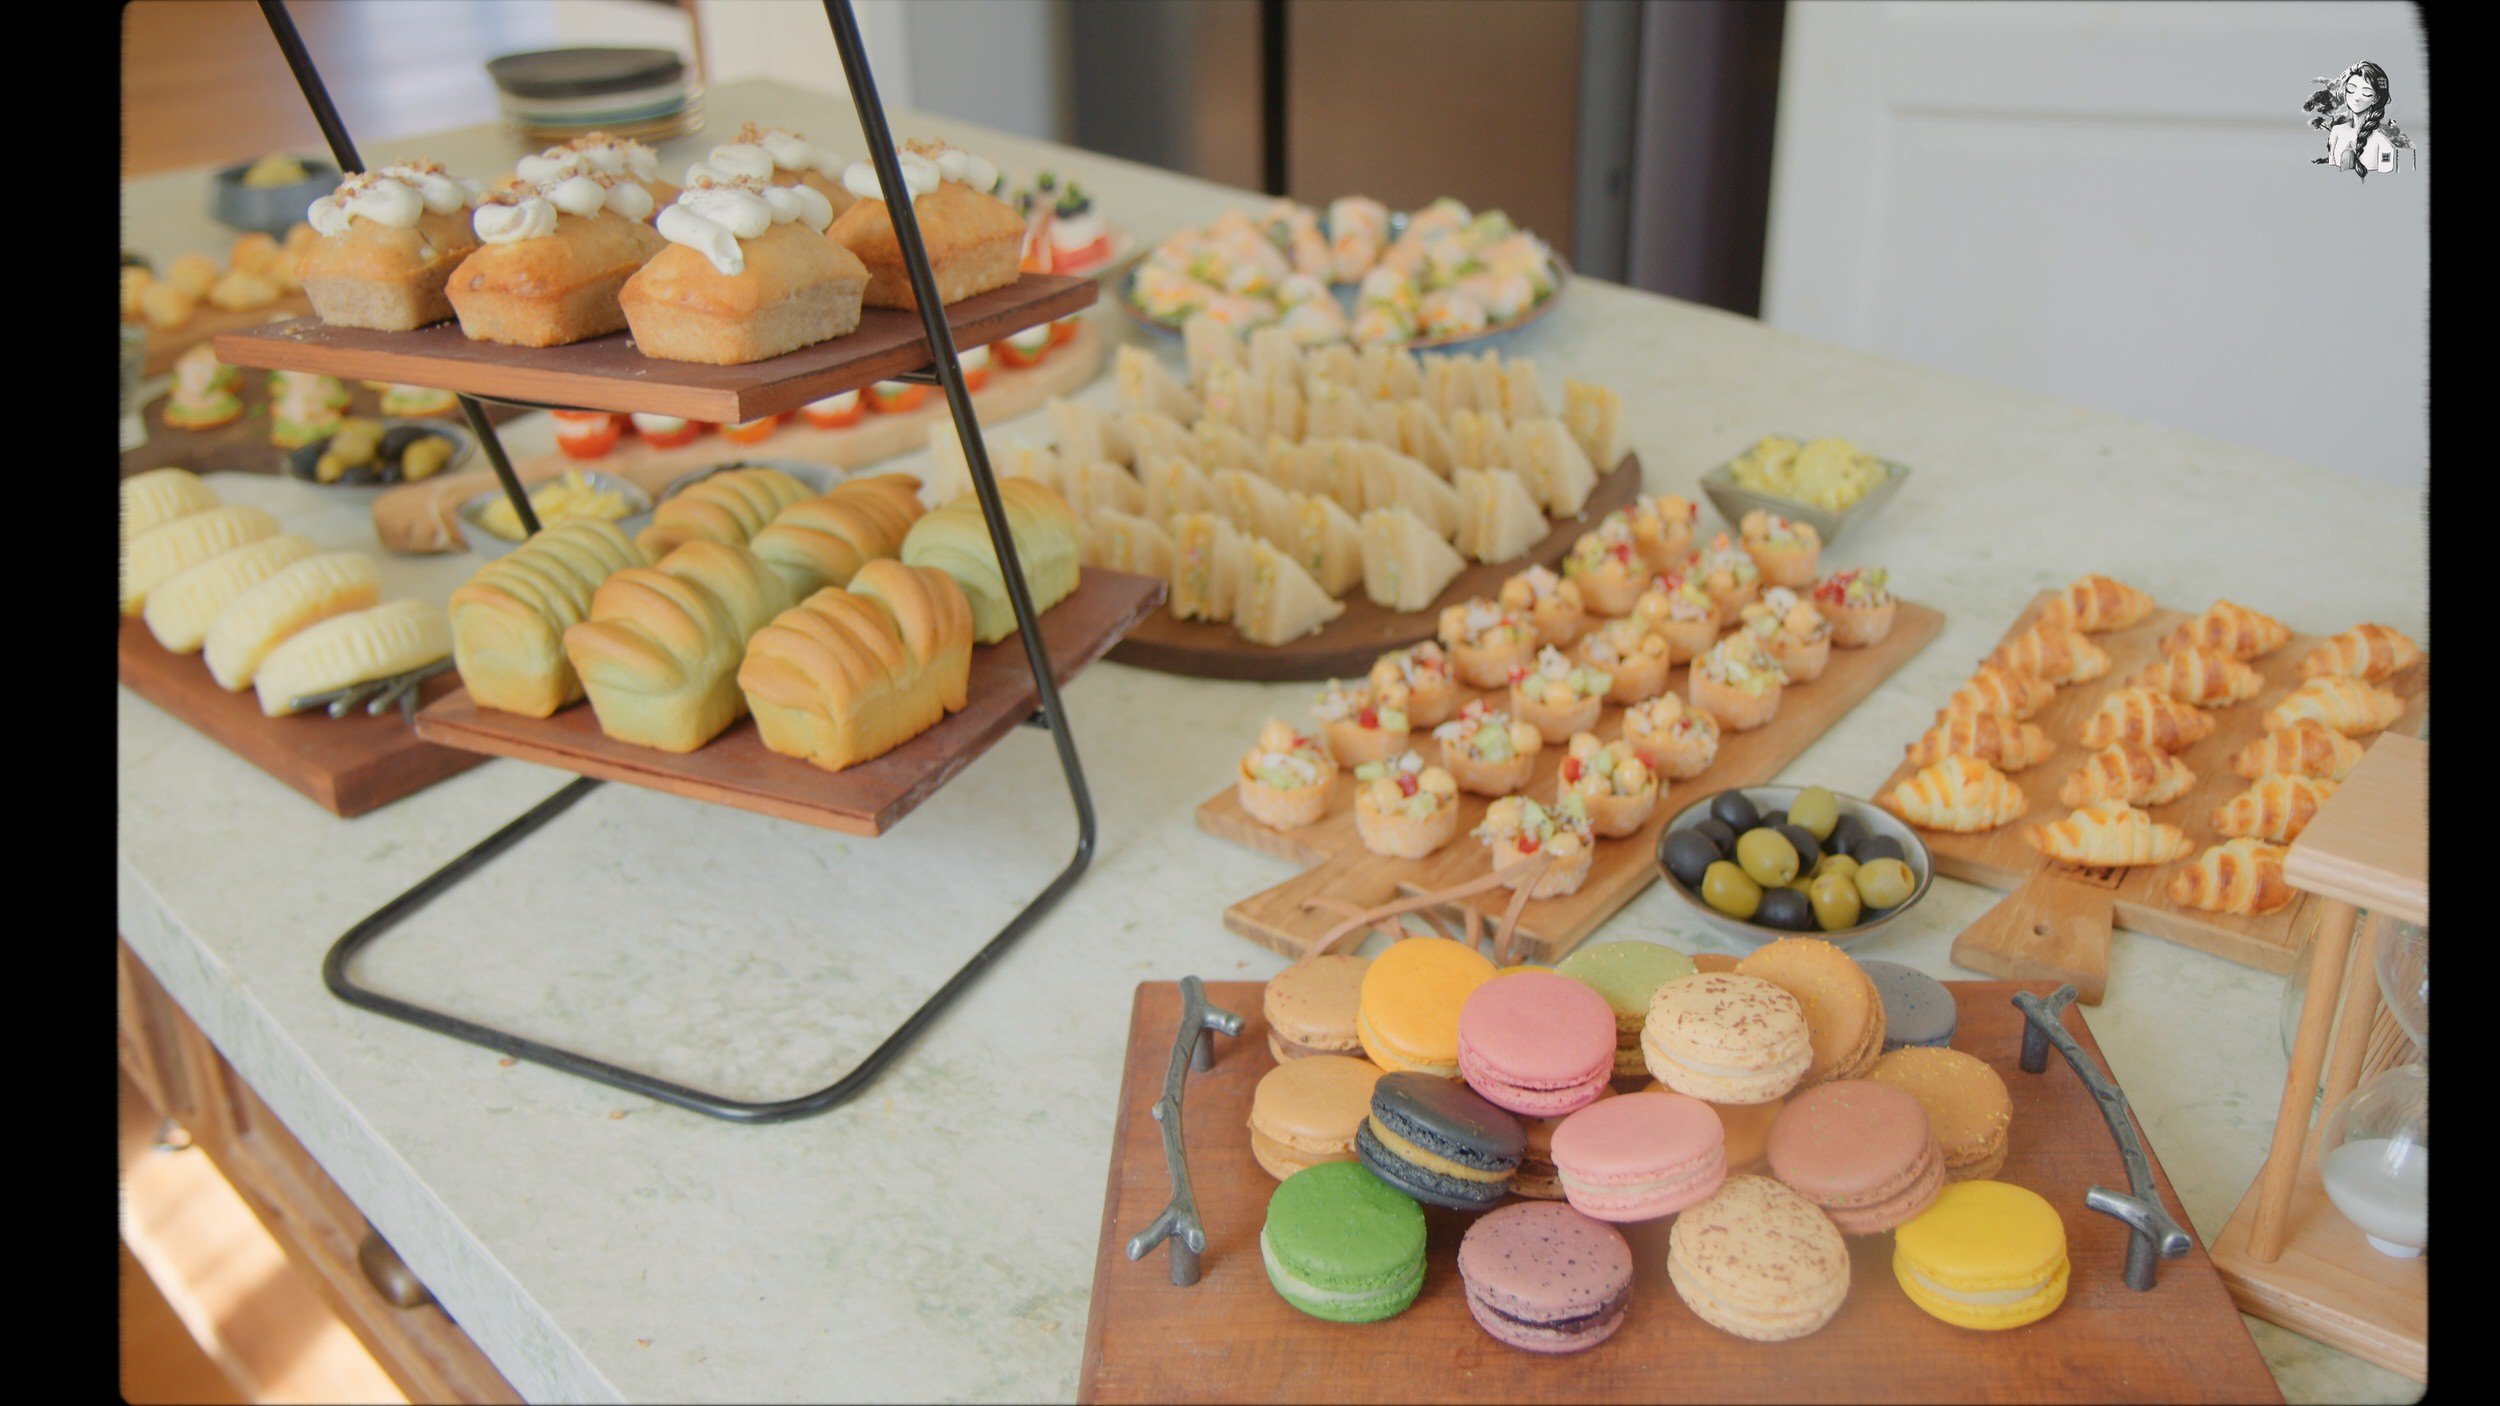 Small Bites Brunch Buffet Ideas for your next party - Her86m2 _1.246.1.jpg